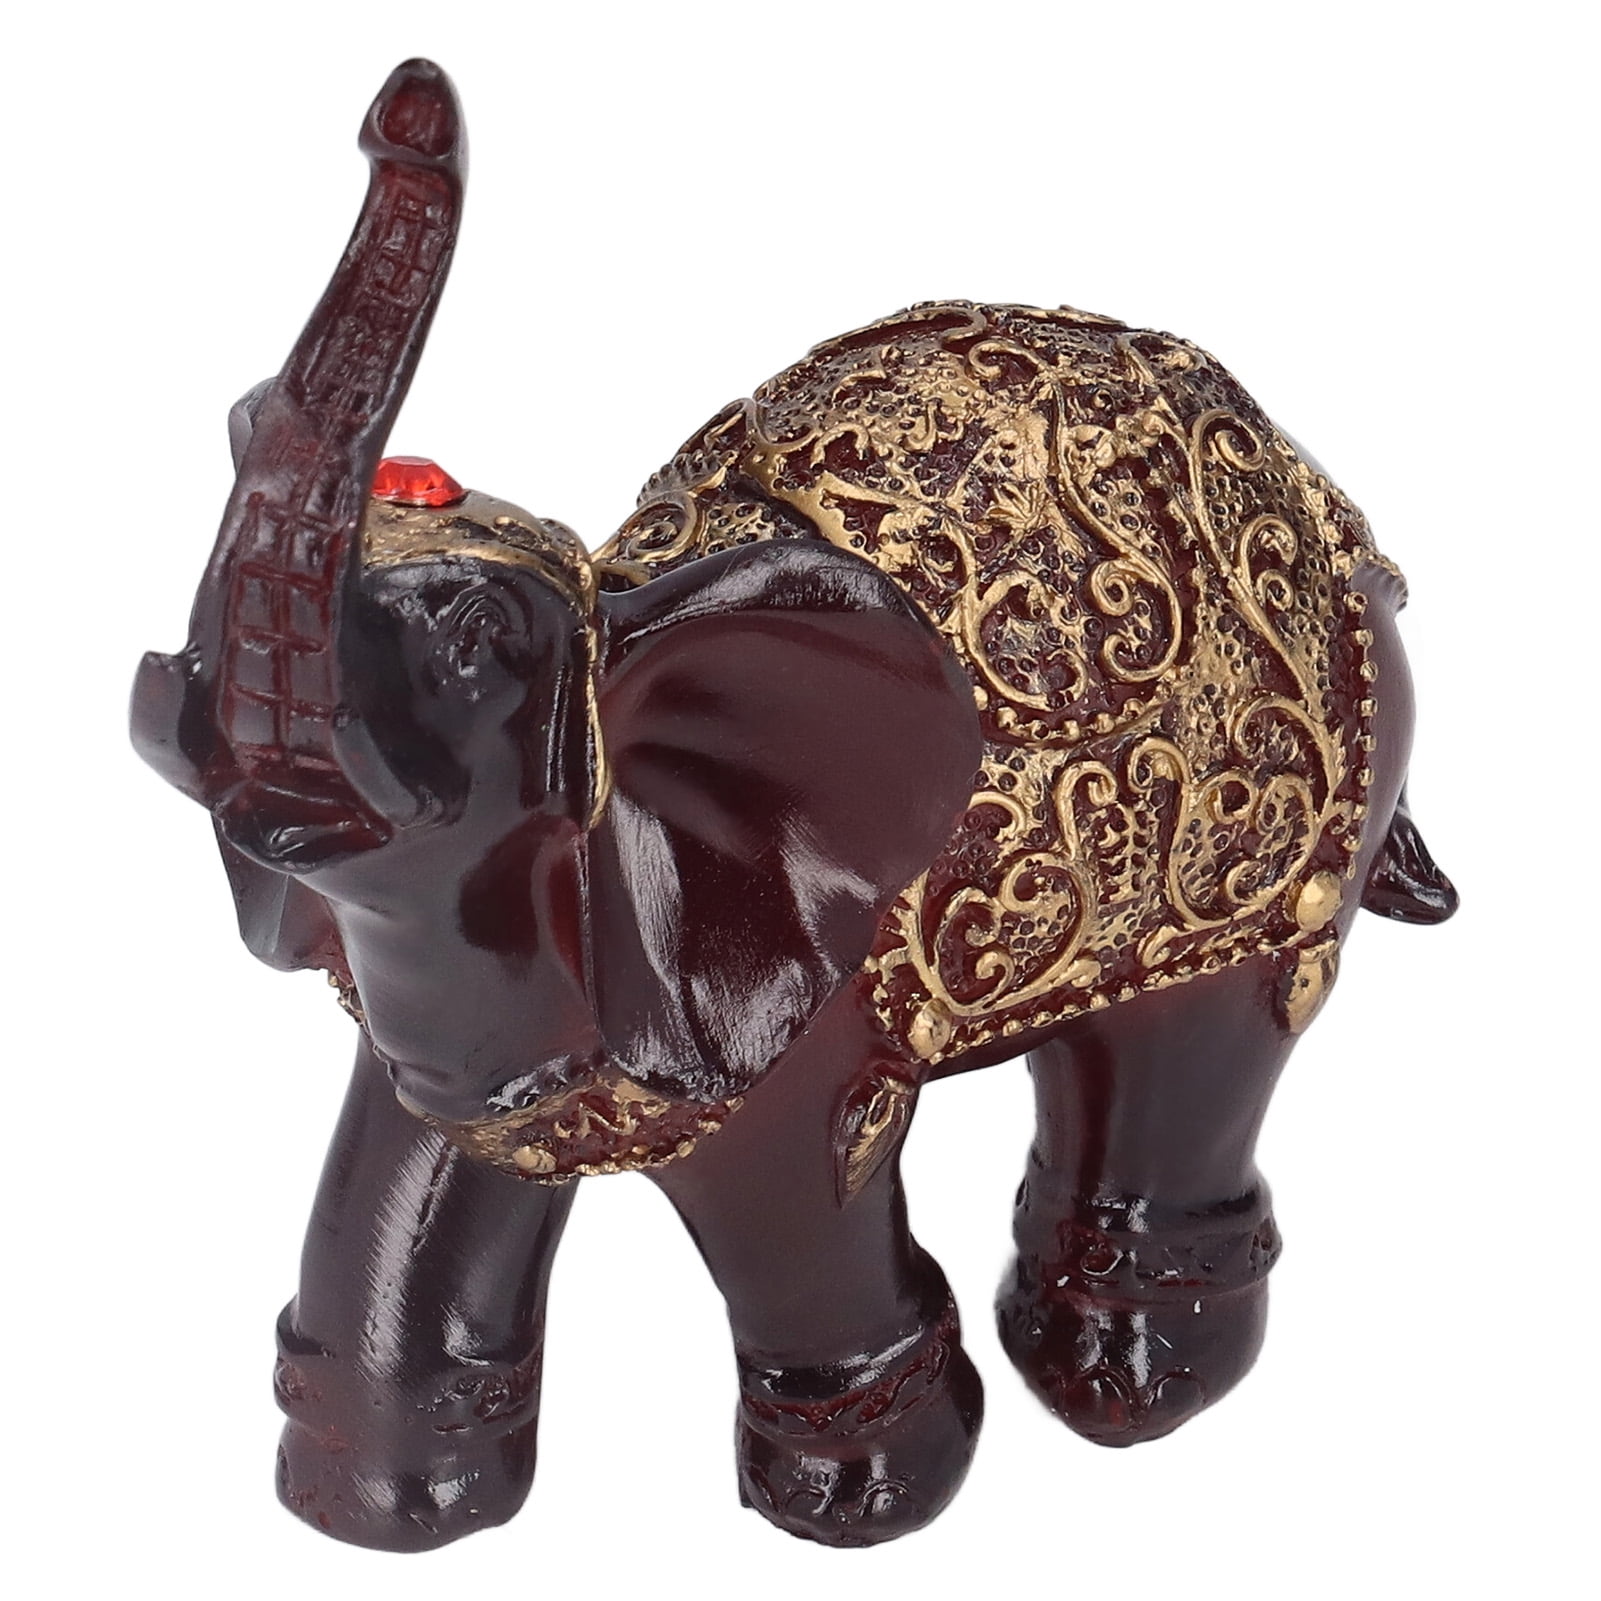 Details about   Trunk Down Baby Elephant Figurine 2.5" High Glossy Finish Resin New 